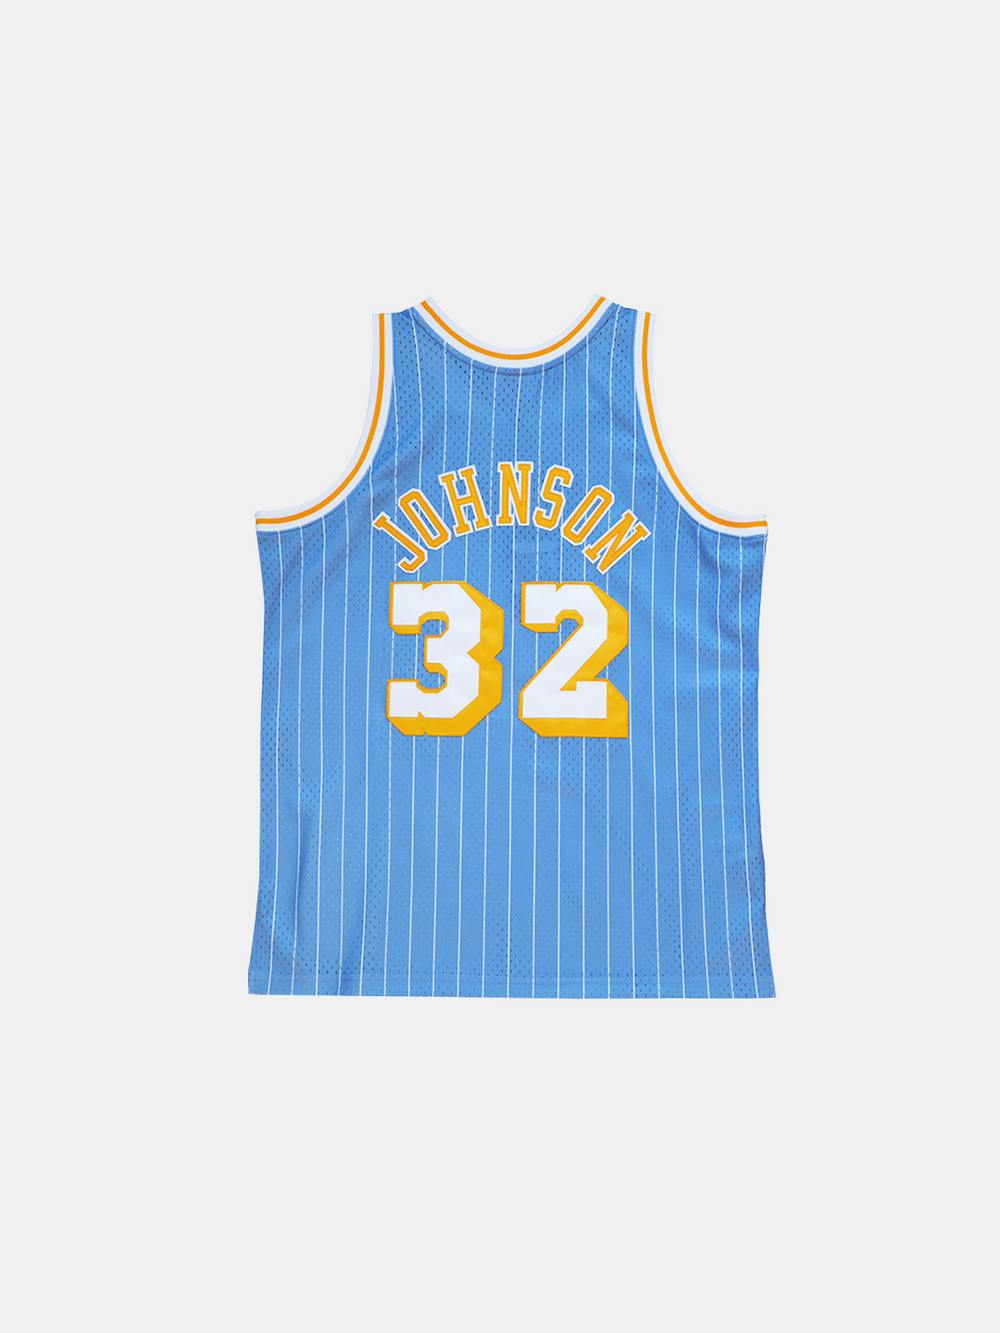 UNINTERRUPTED X Mitchell & Ness Legends Jersey Lakers - Back